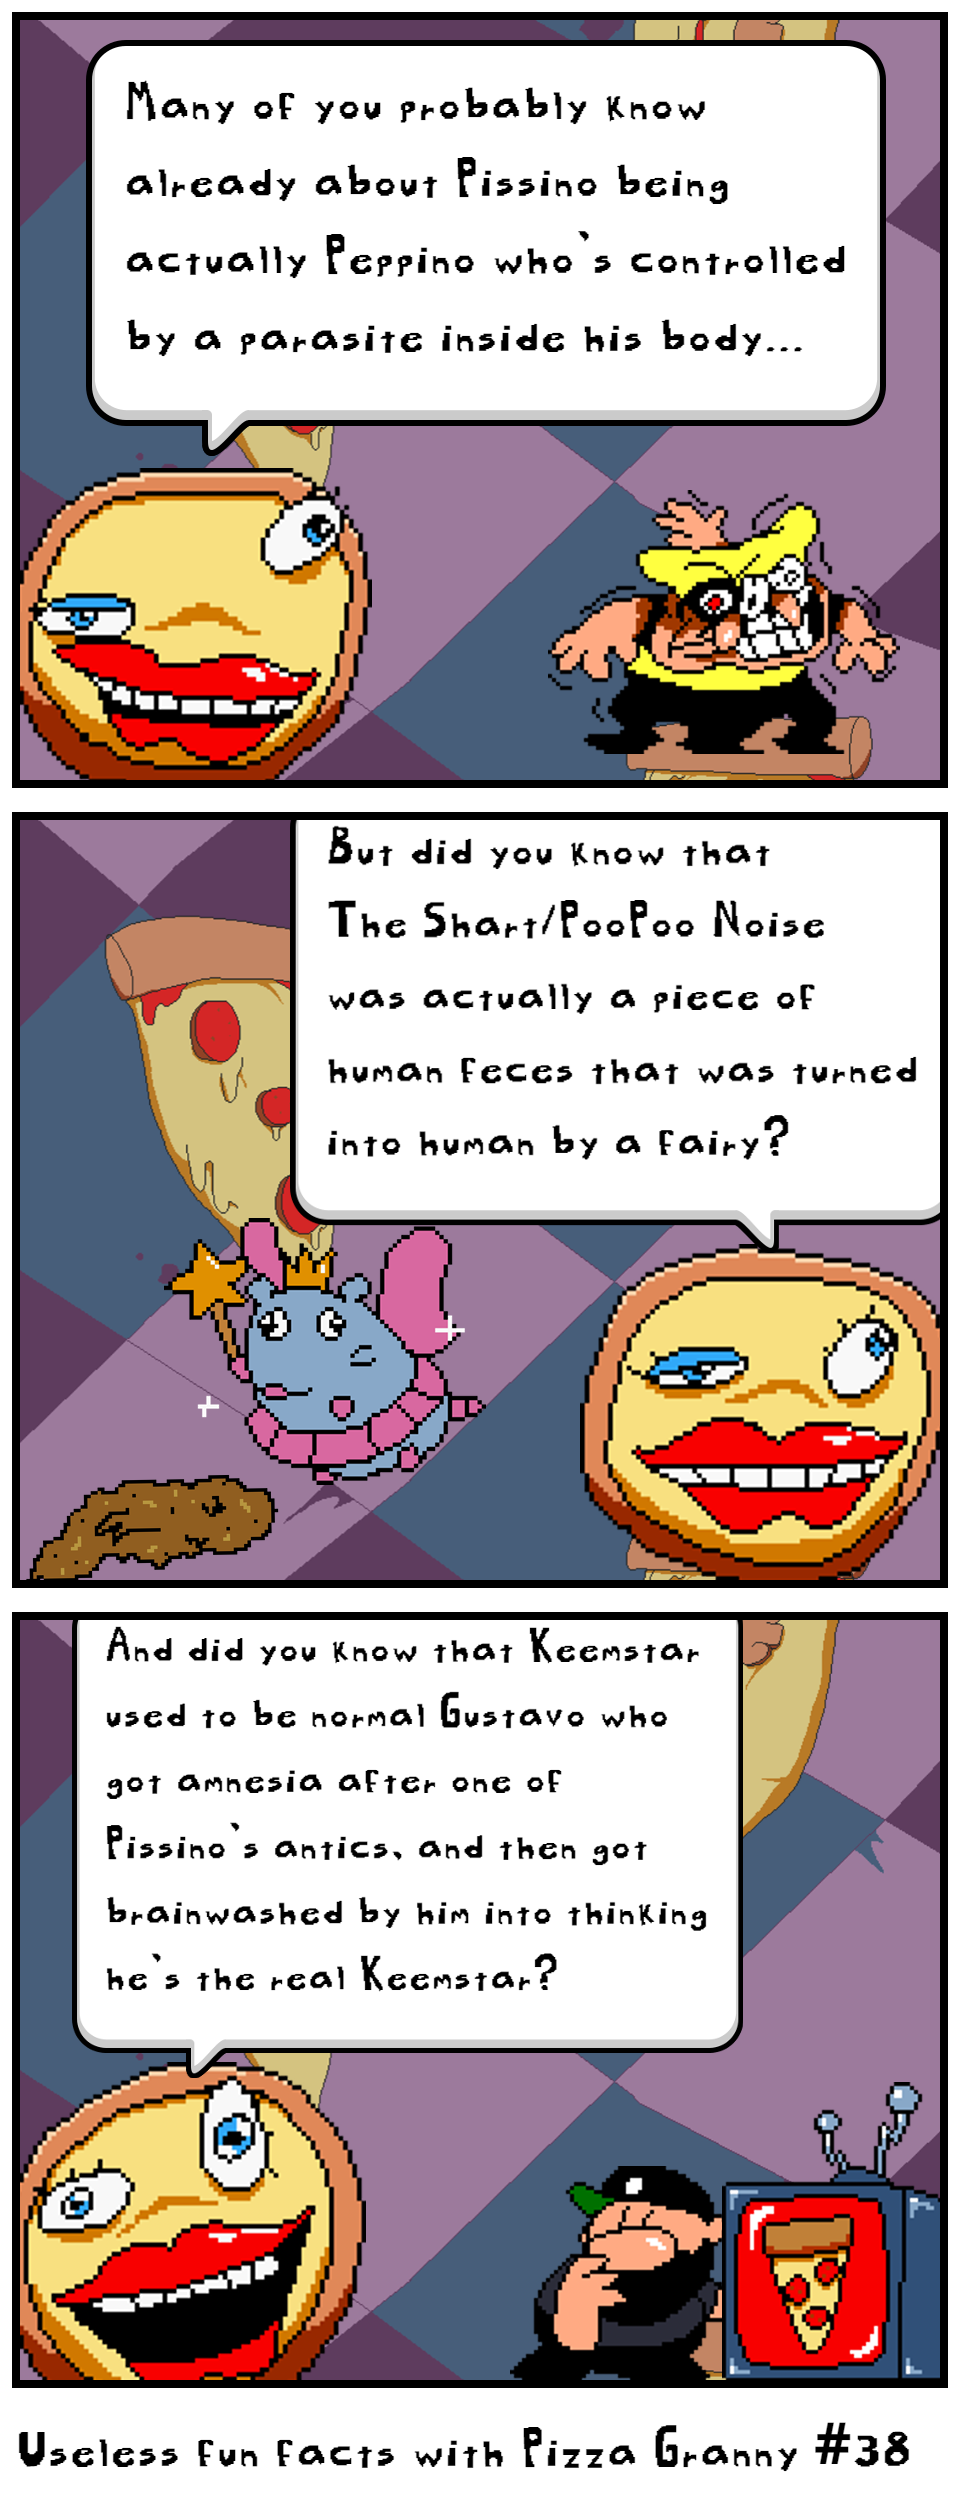 Useless fun facts with Pizza Granny #38